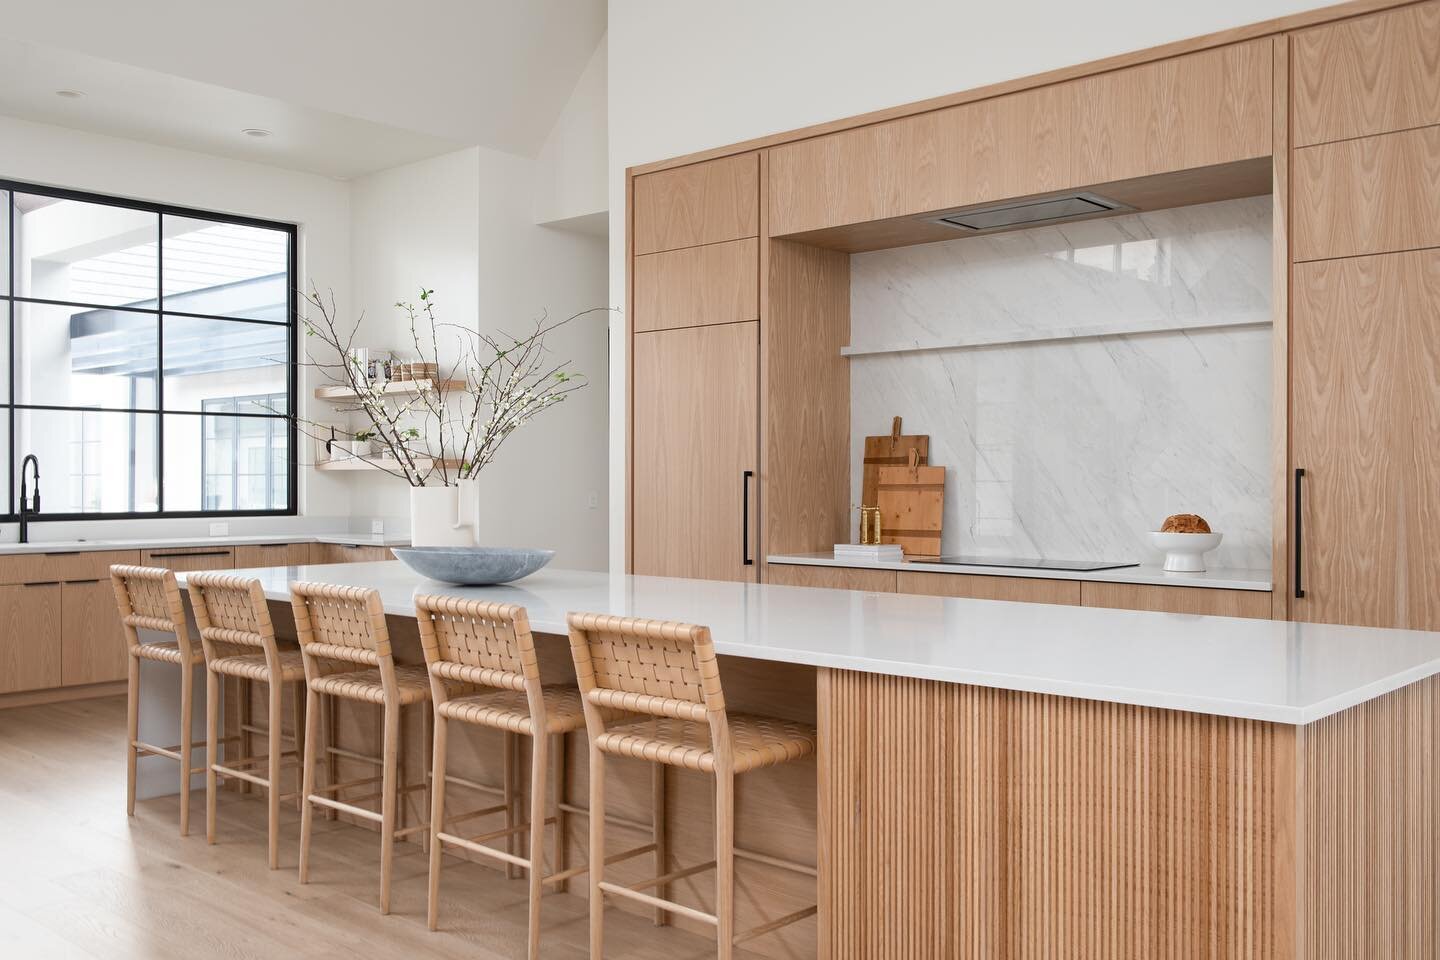 White oak minimalism at it&rsquo;s finest. The simple detail on the kitchen island adds so much texture. Such a pretty kitchen!